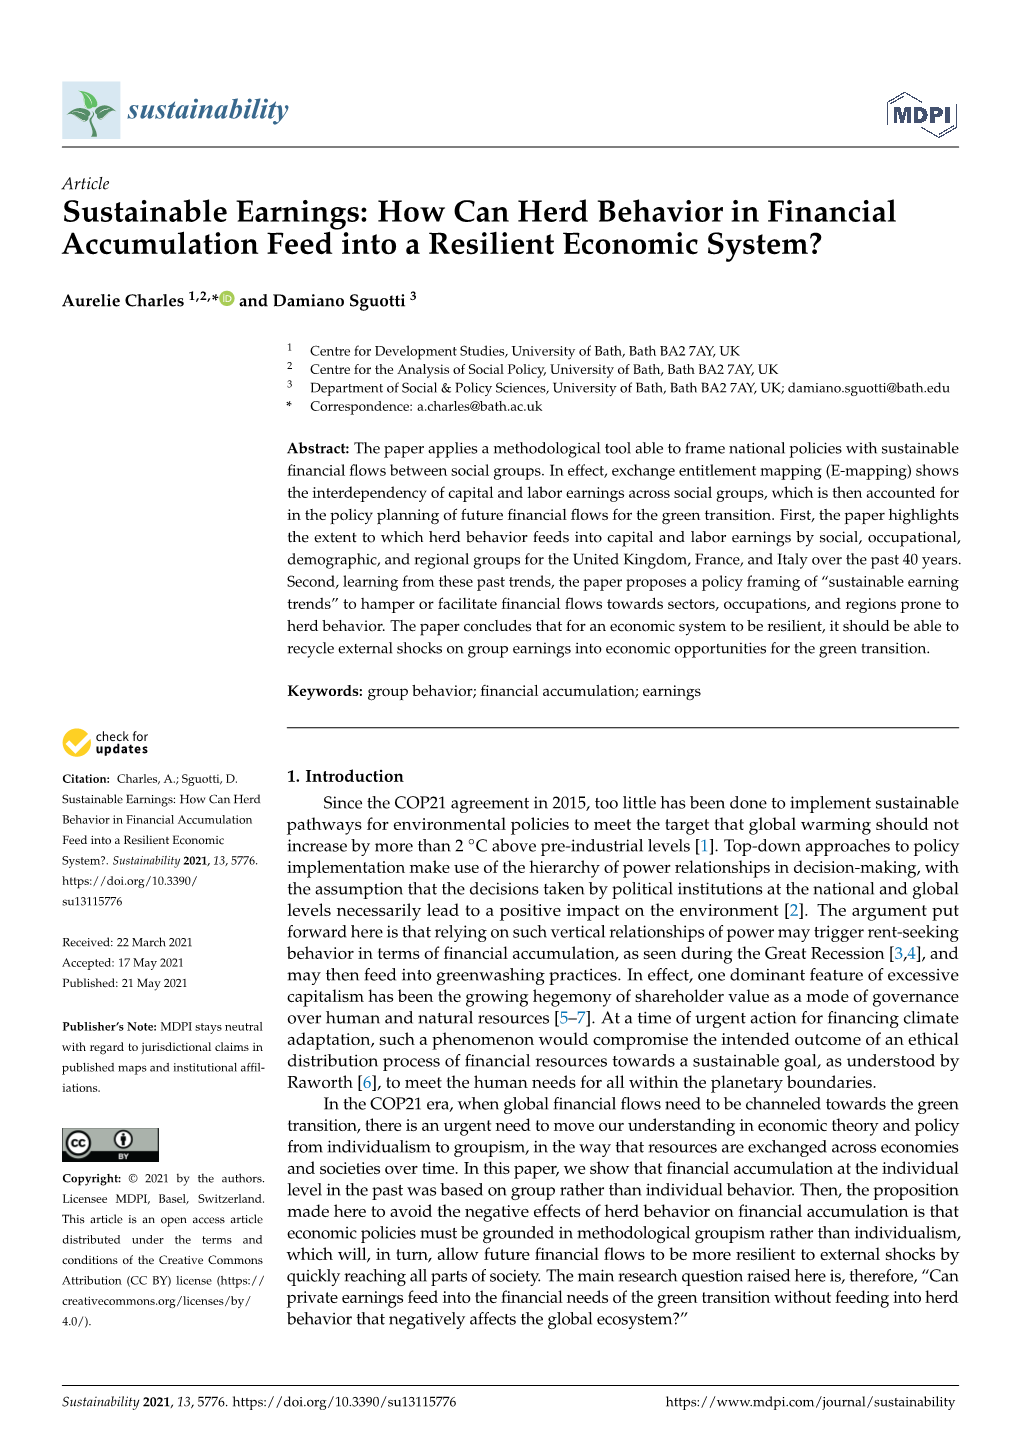 Sustainable Earnings: How Can Herd Behavior in Financial Accumulation Feed Into a Resilient Economic System?